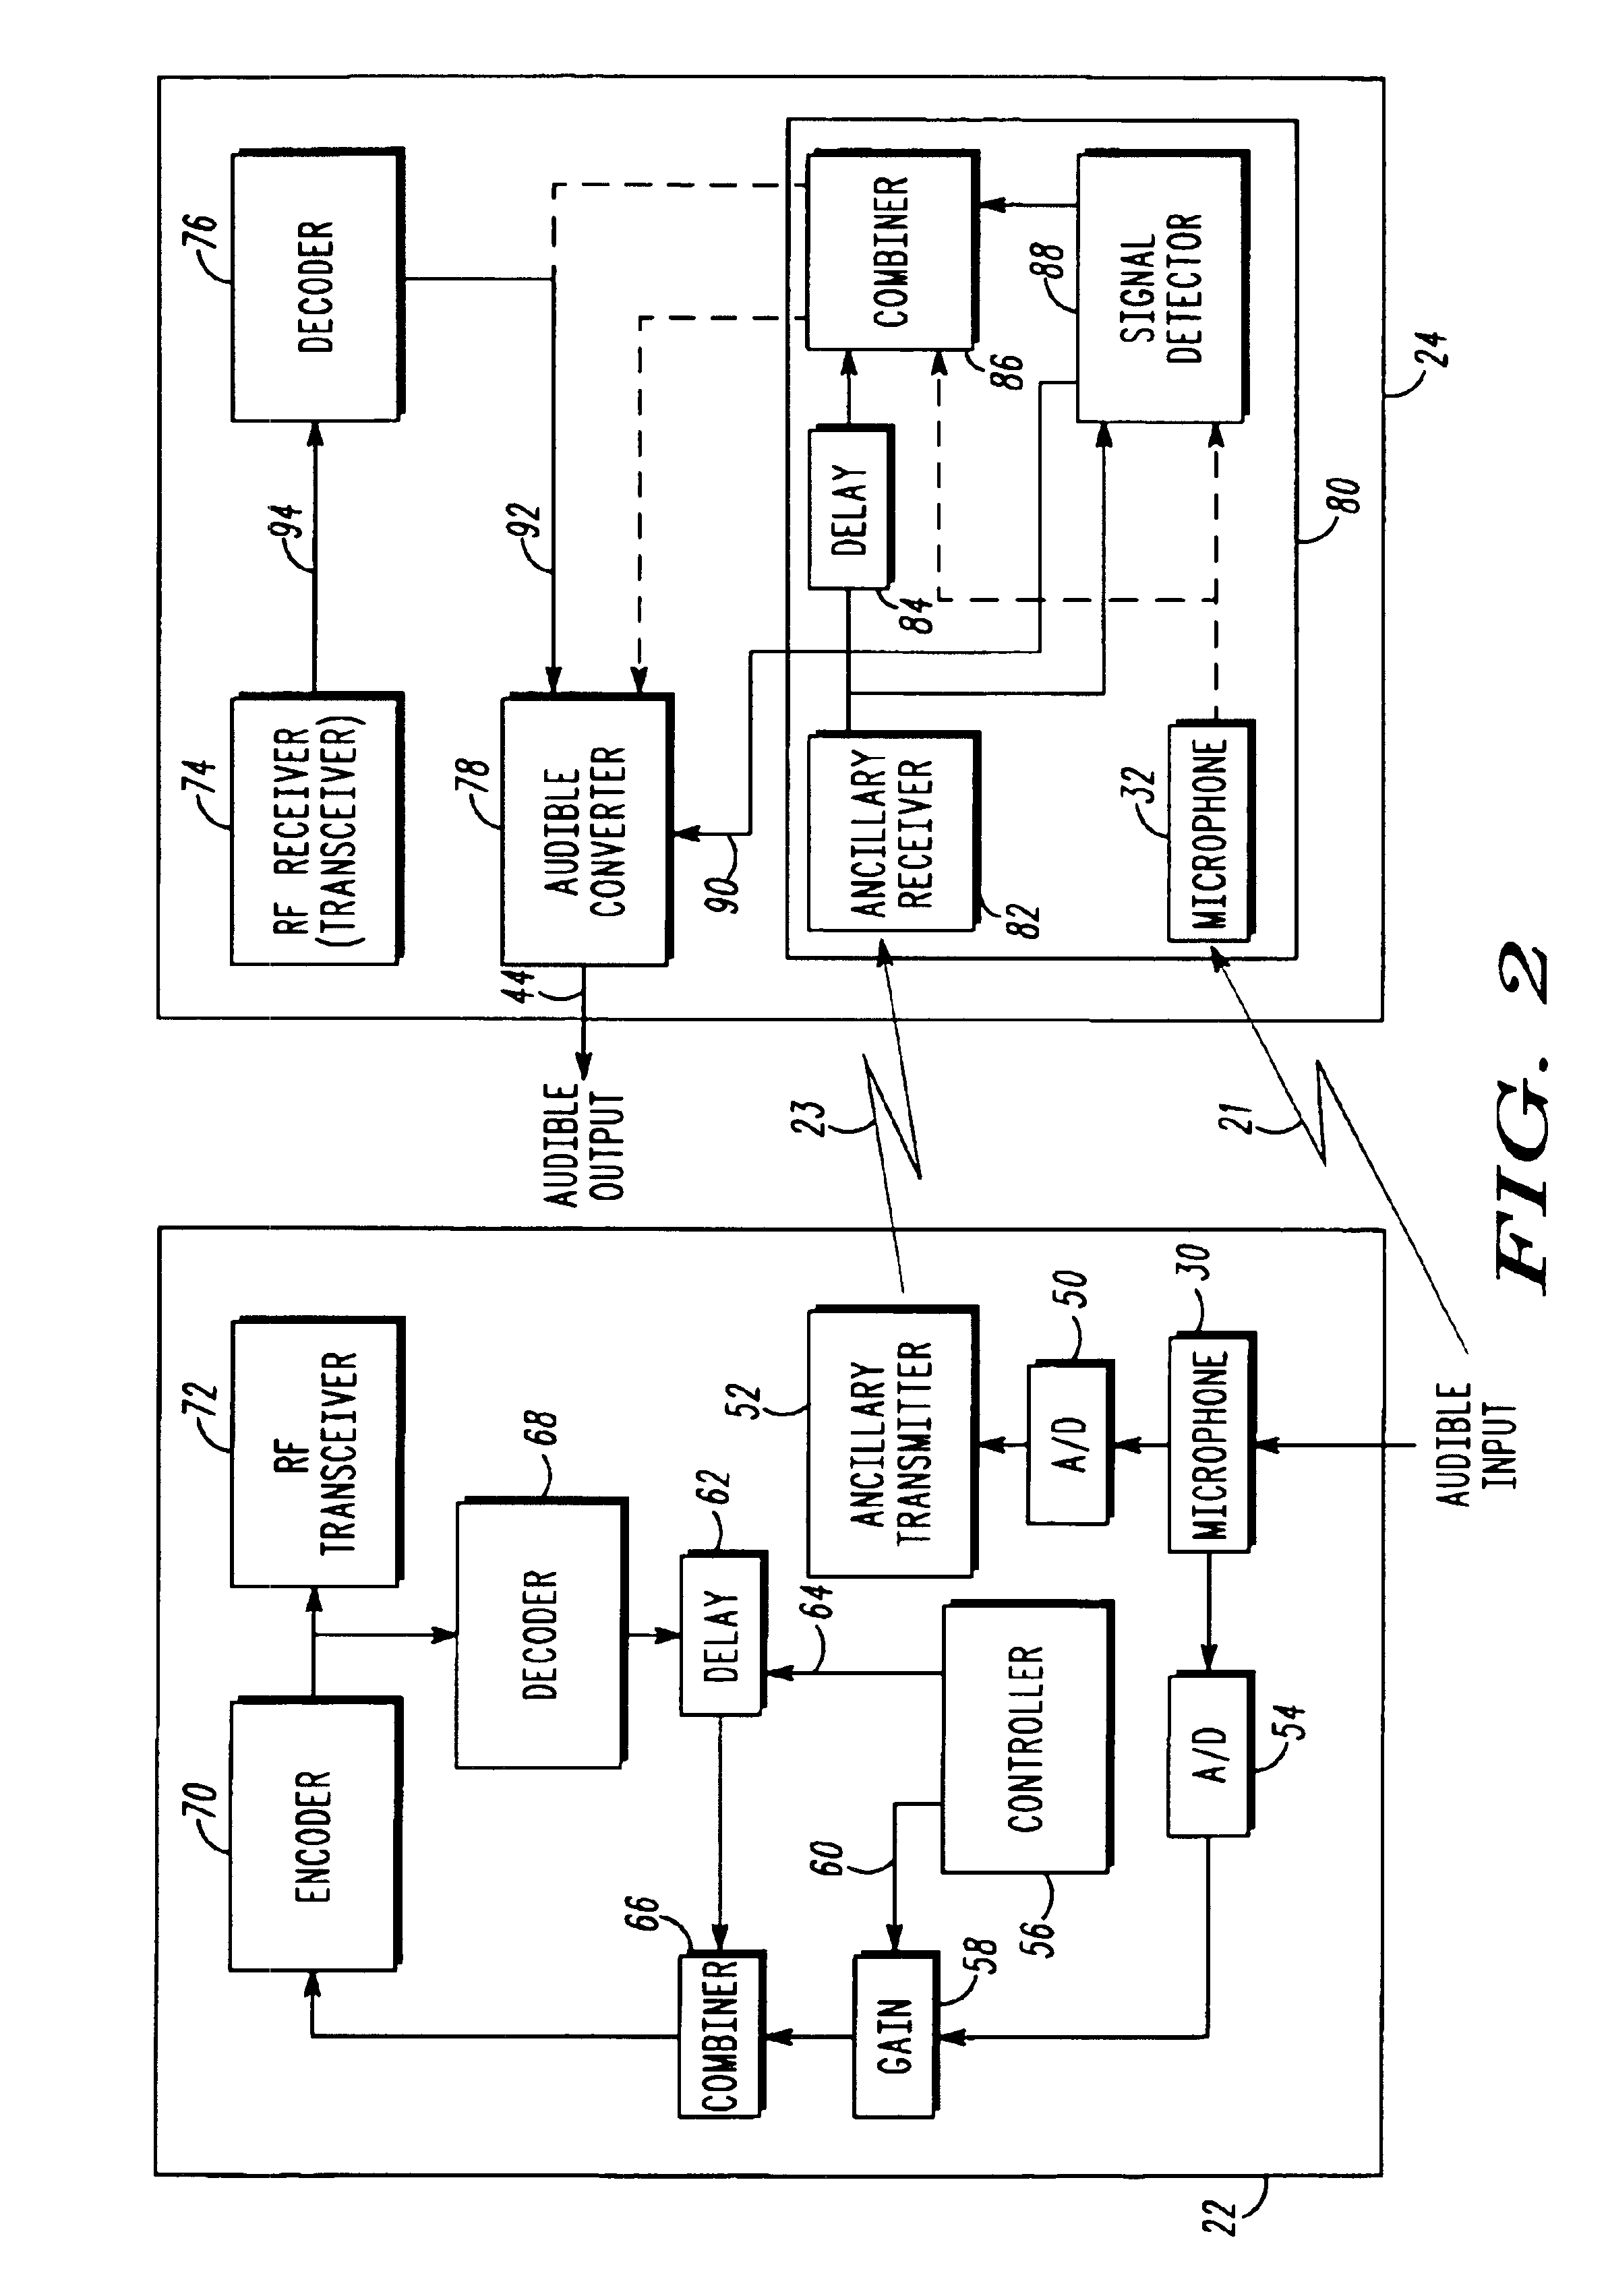 Method and apparatus for reducing echo feedback in a communication system